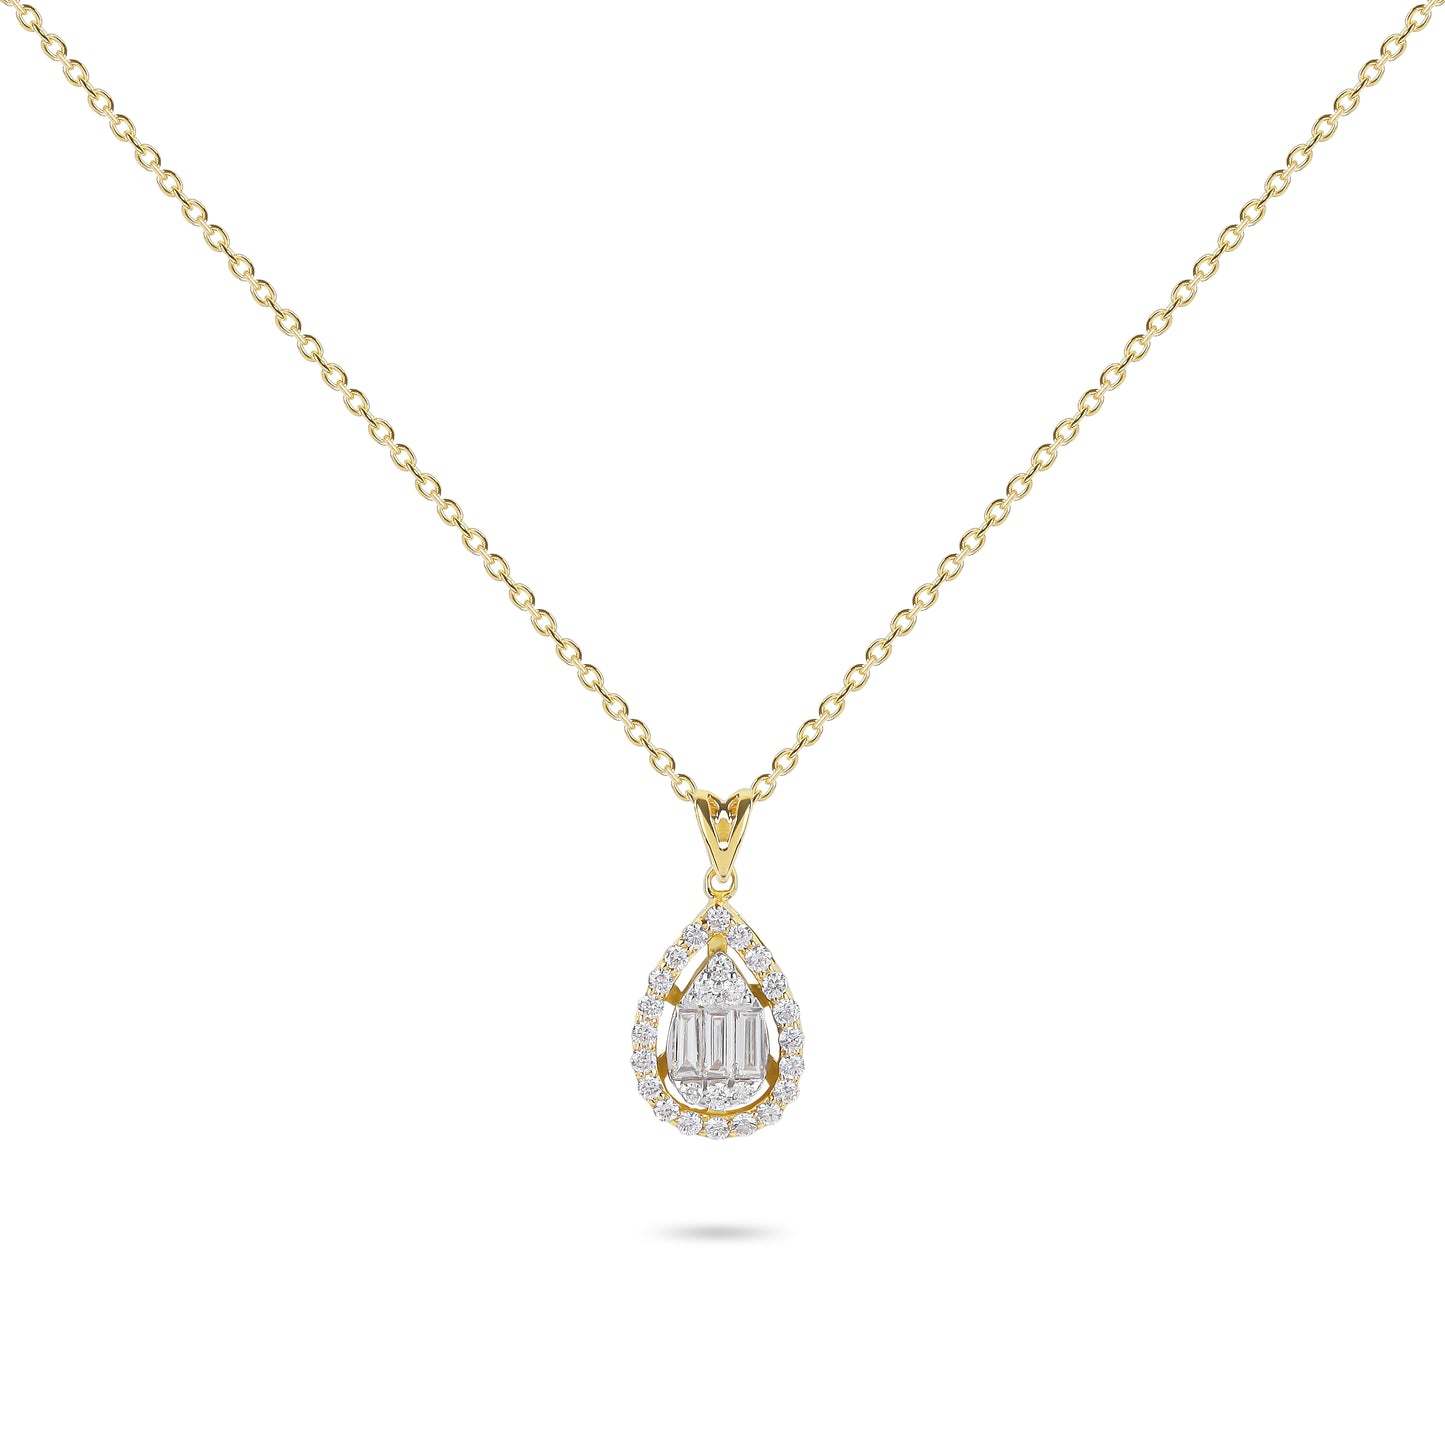 Baguette Diamonds with Frame Necklace